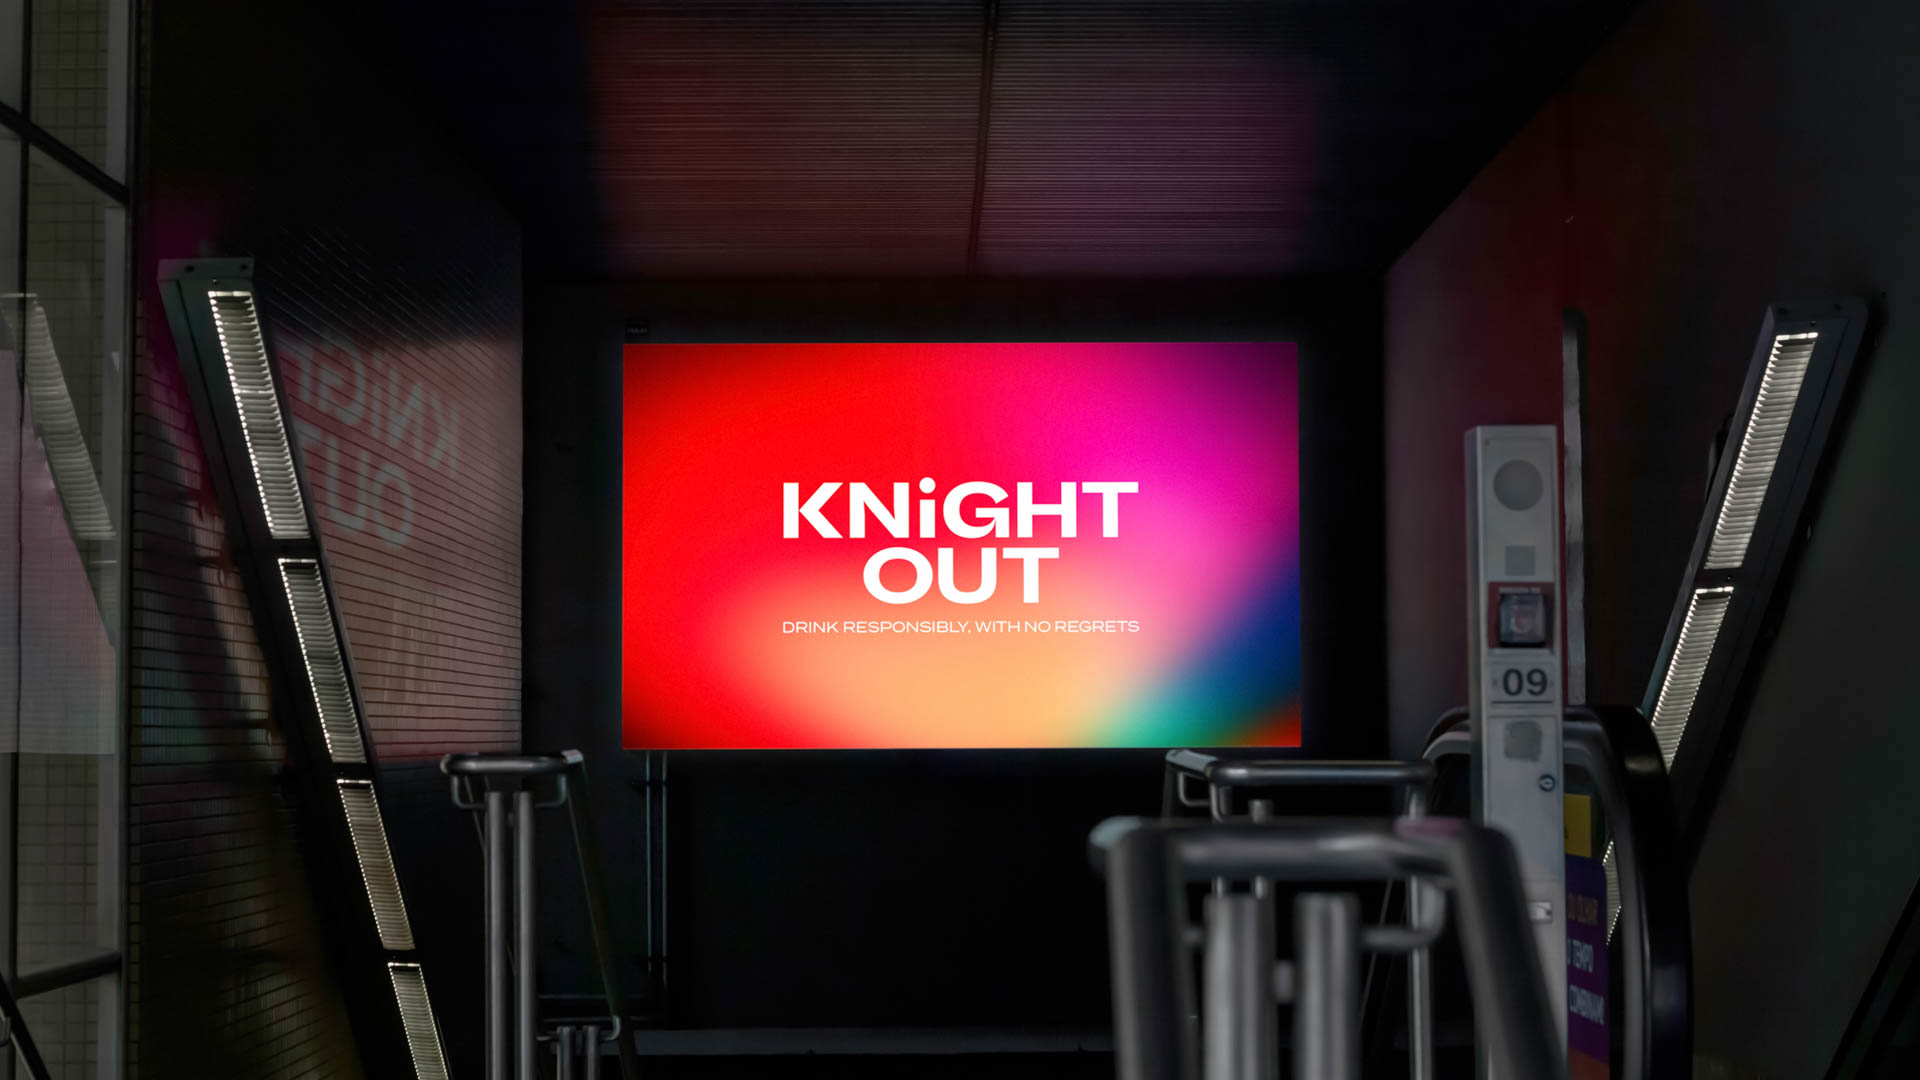 branding for the Knight Out app